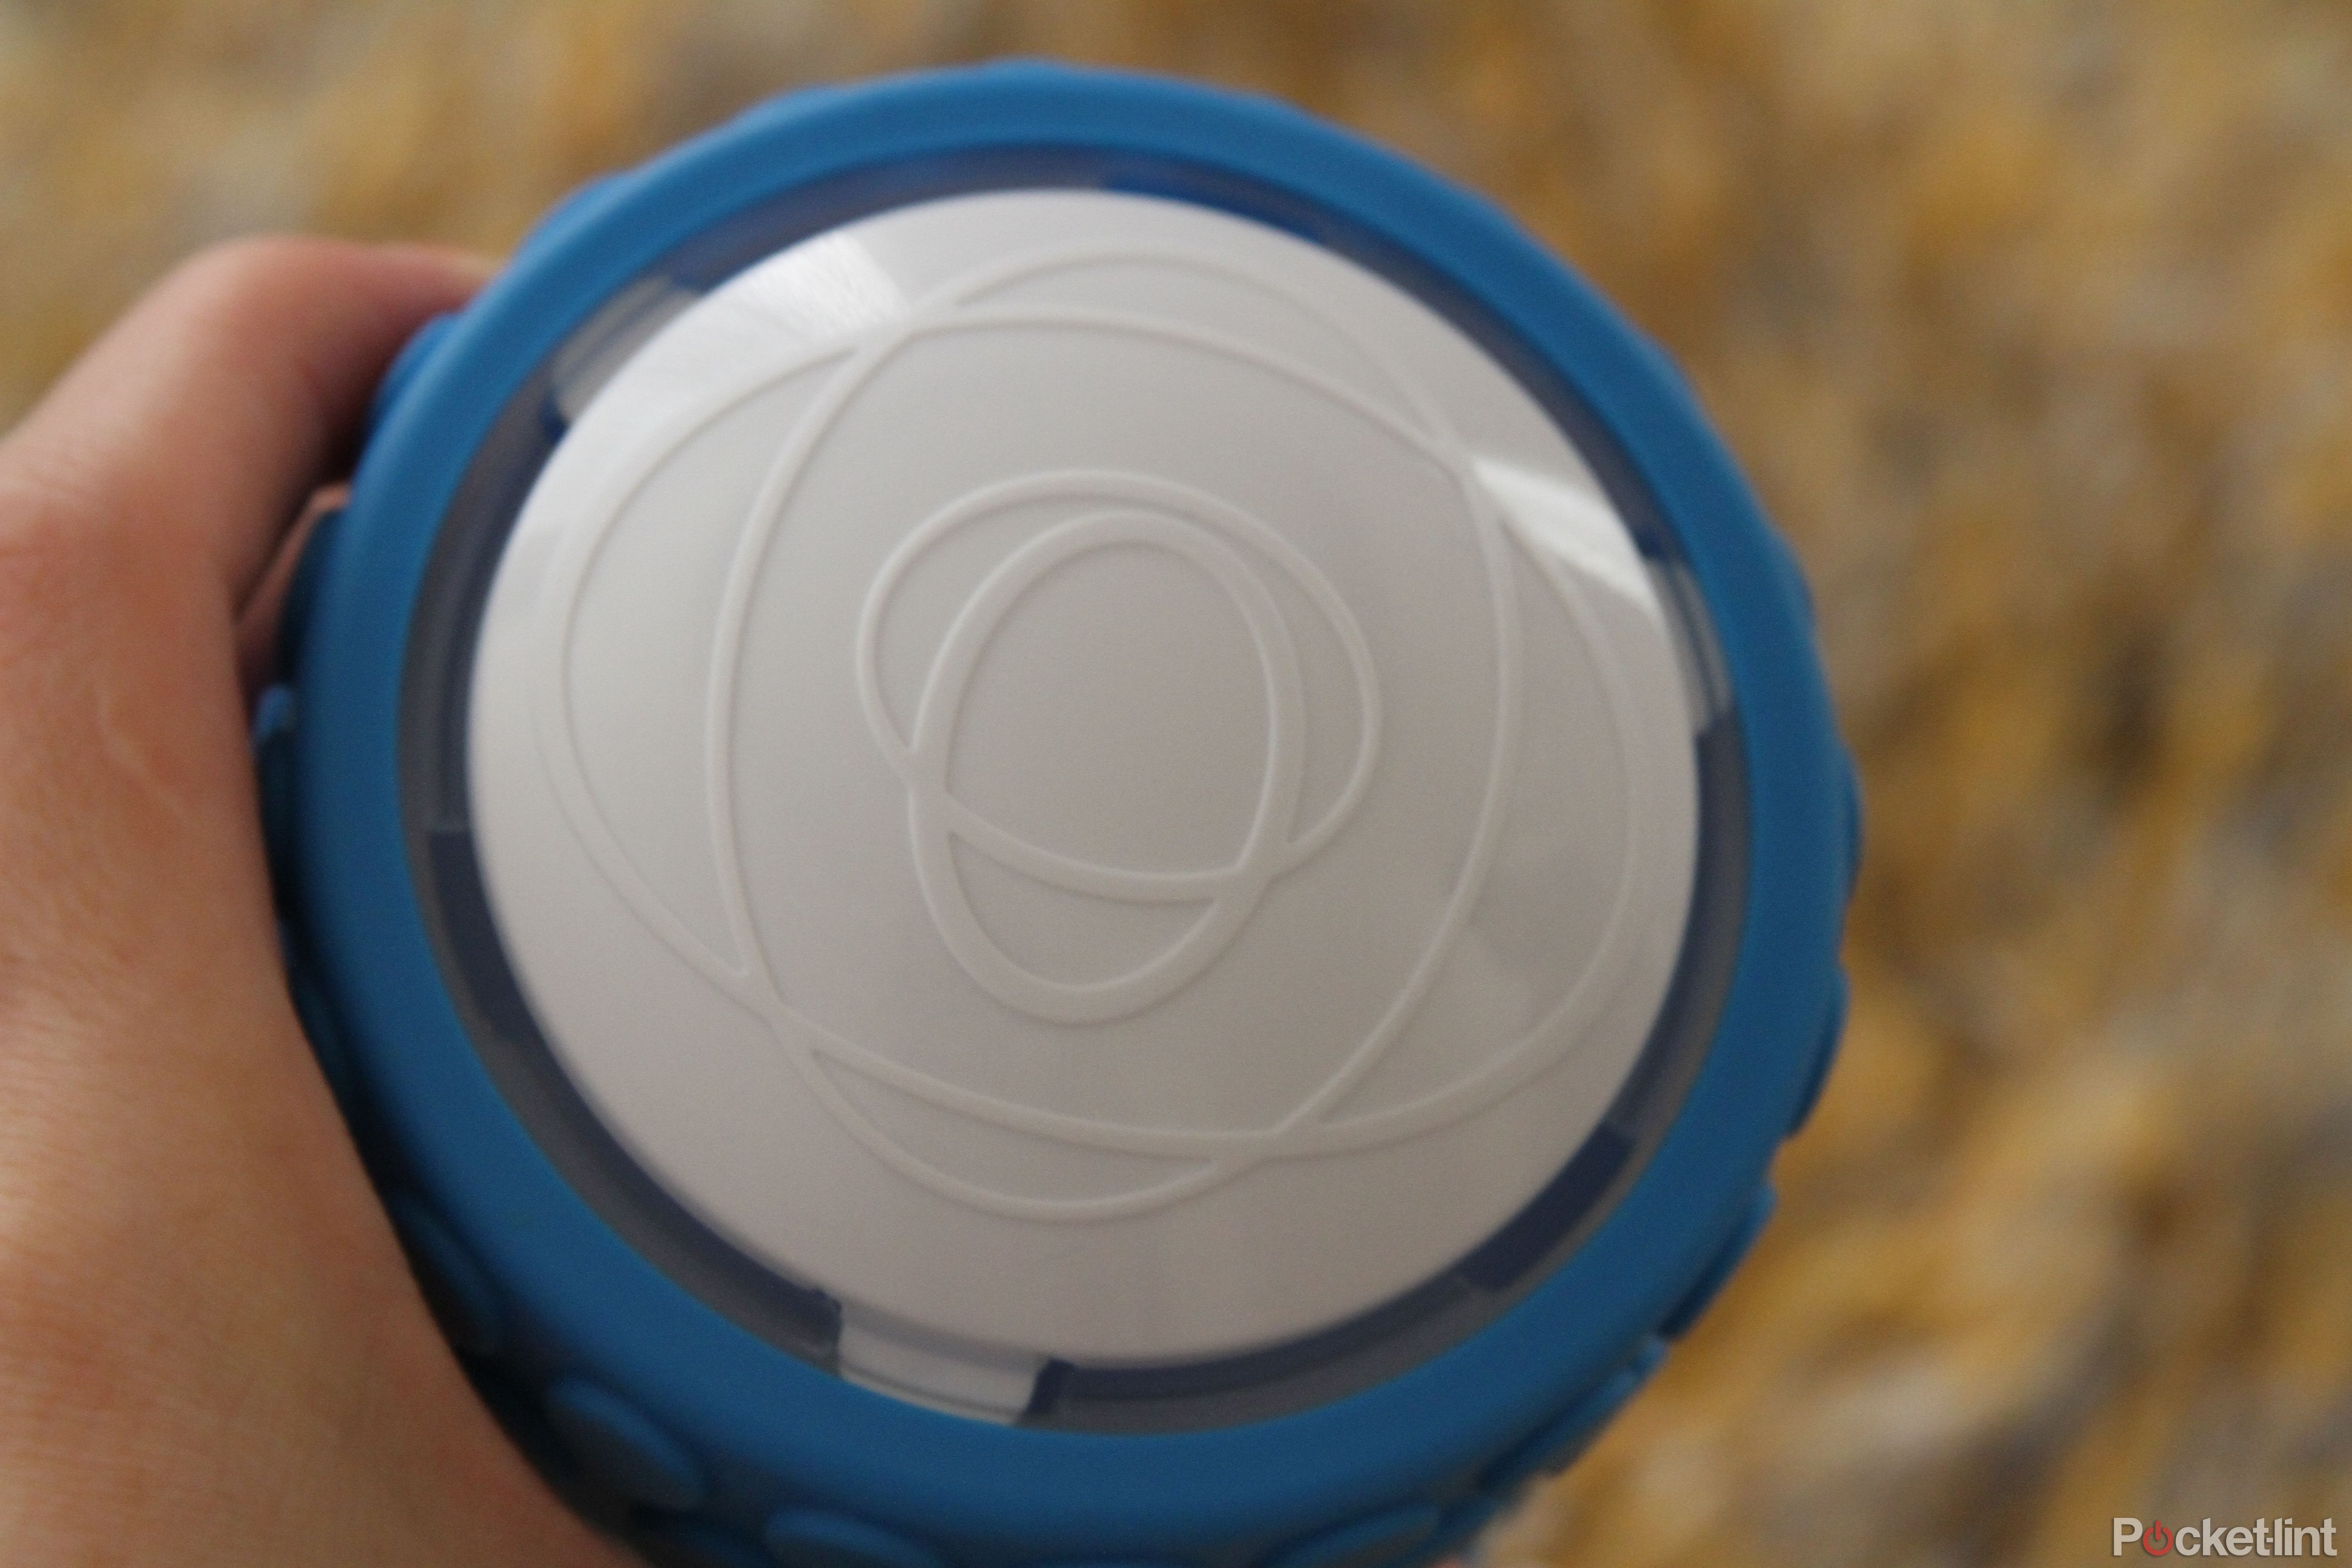 https://static0.pocketlintimages.com/wordpress/wp-content/uploads/wm/130719-parenting-news-hands-on-sphero-ollie-hands-on-review-cylindrical-fast-and-totally-cool-image9-vkYlIxpgH8.jpg